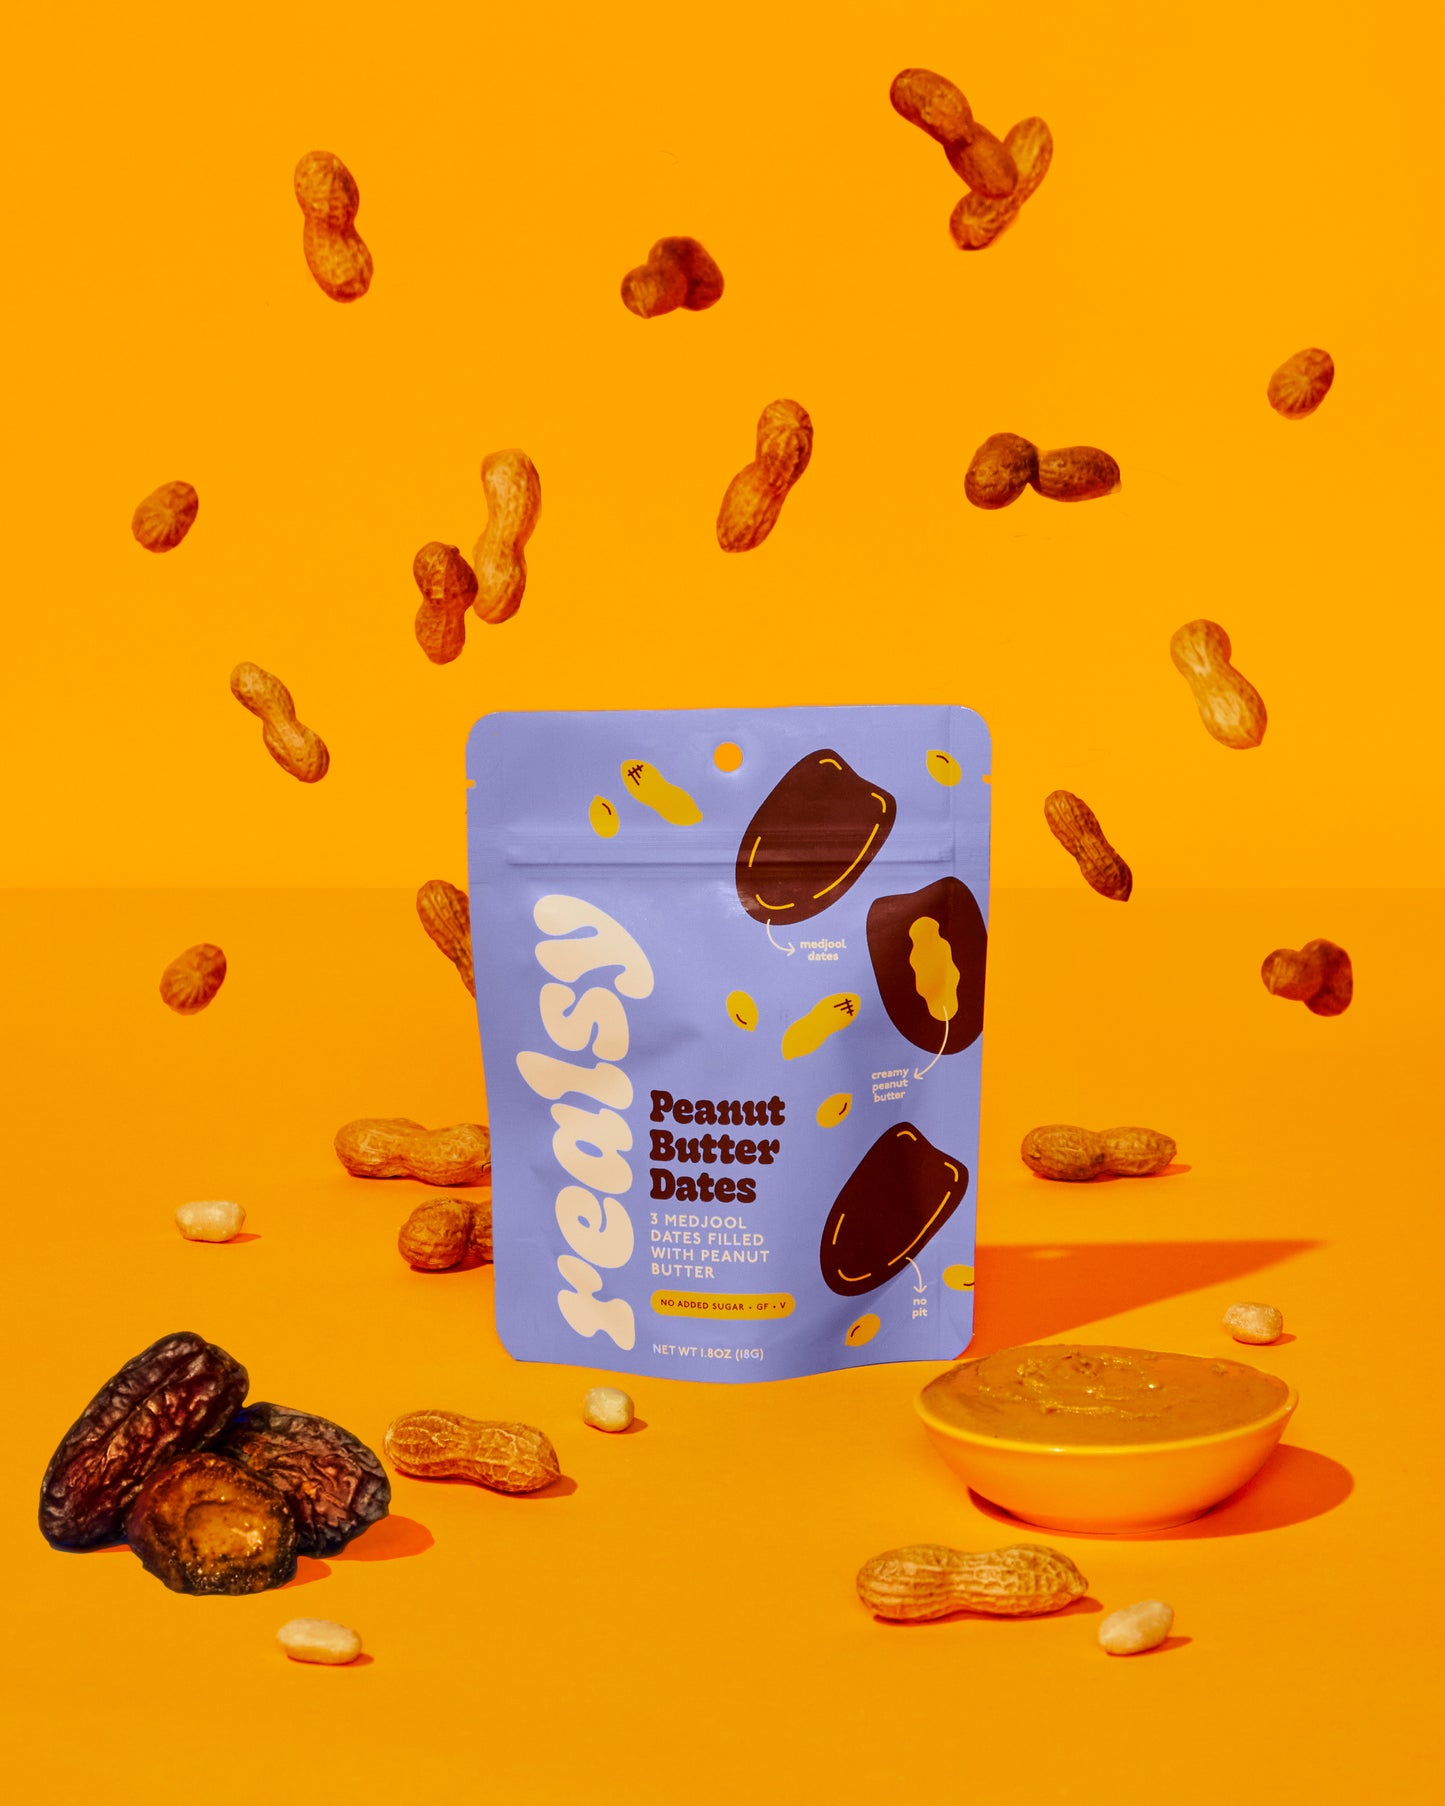 Peanut Butter Dates (10 pack) | Snack Packs